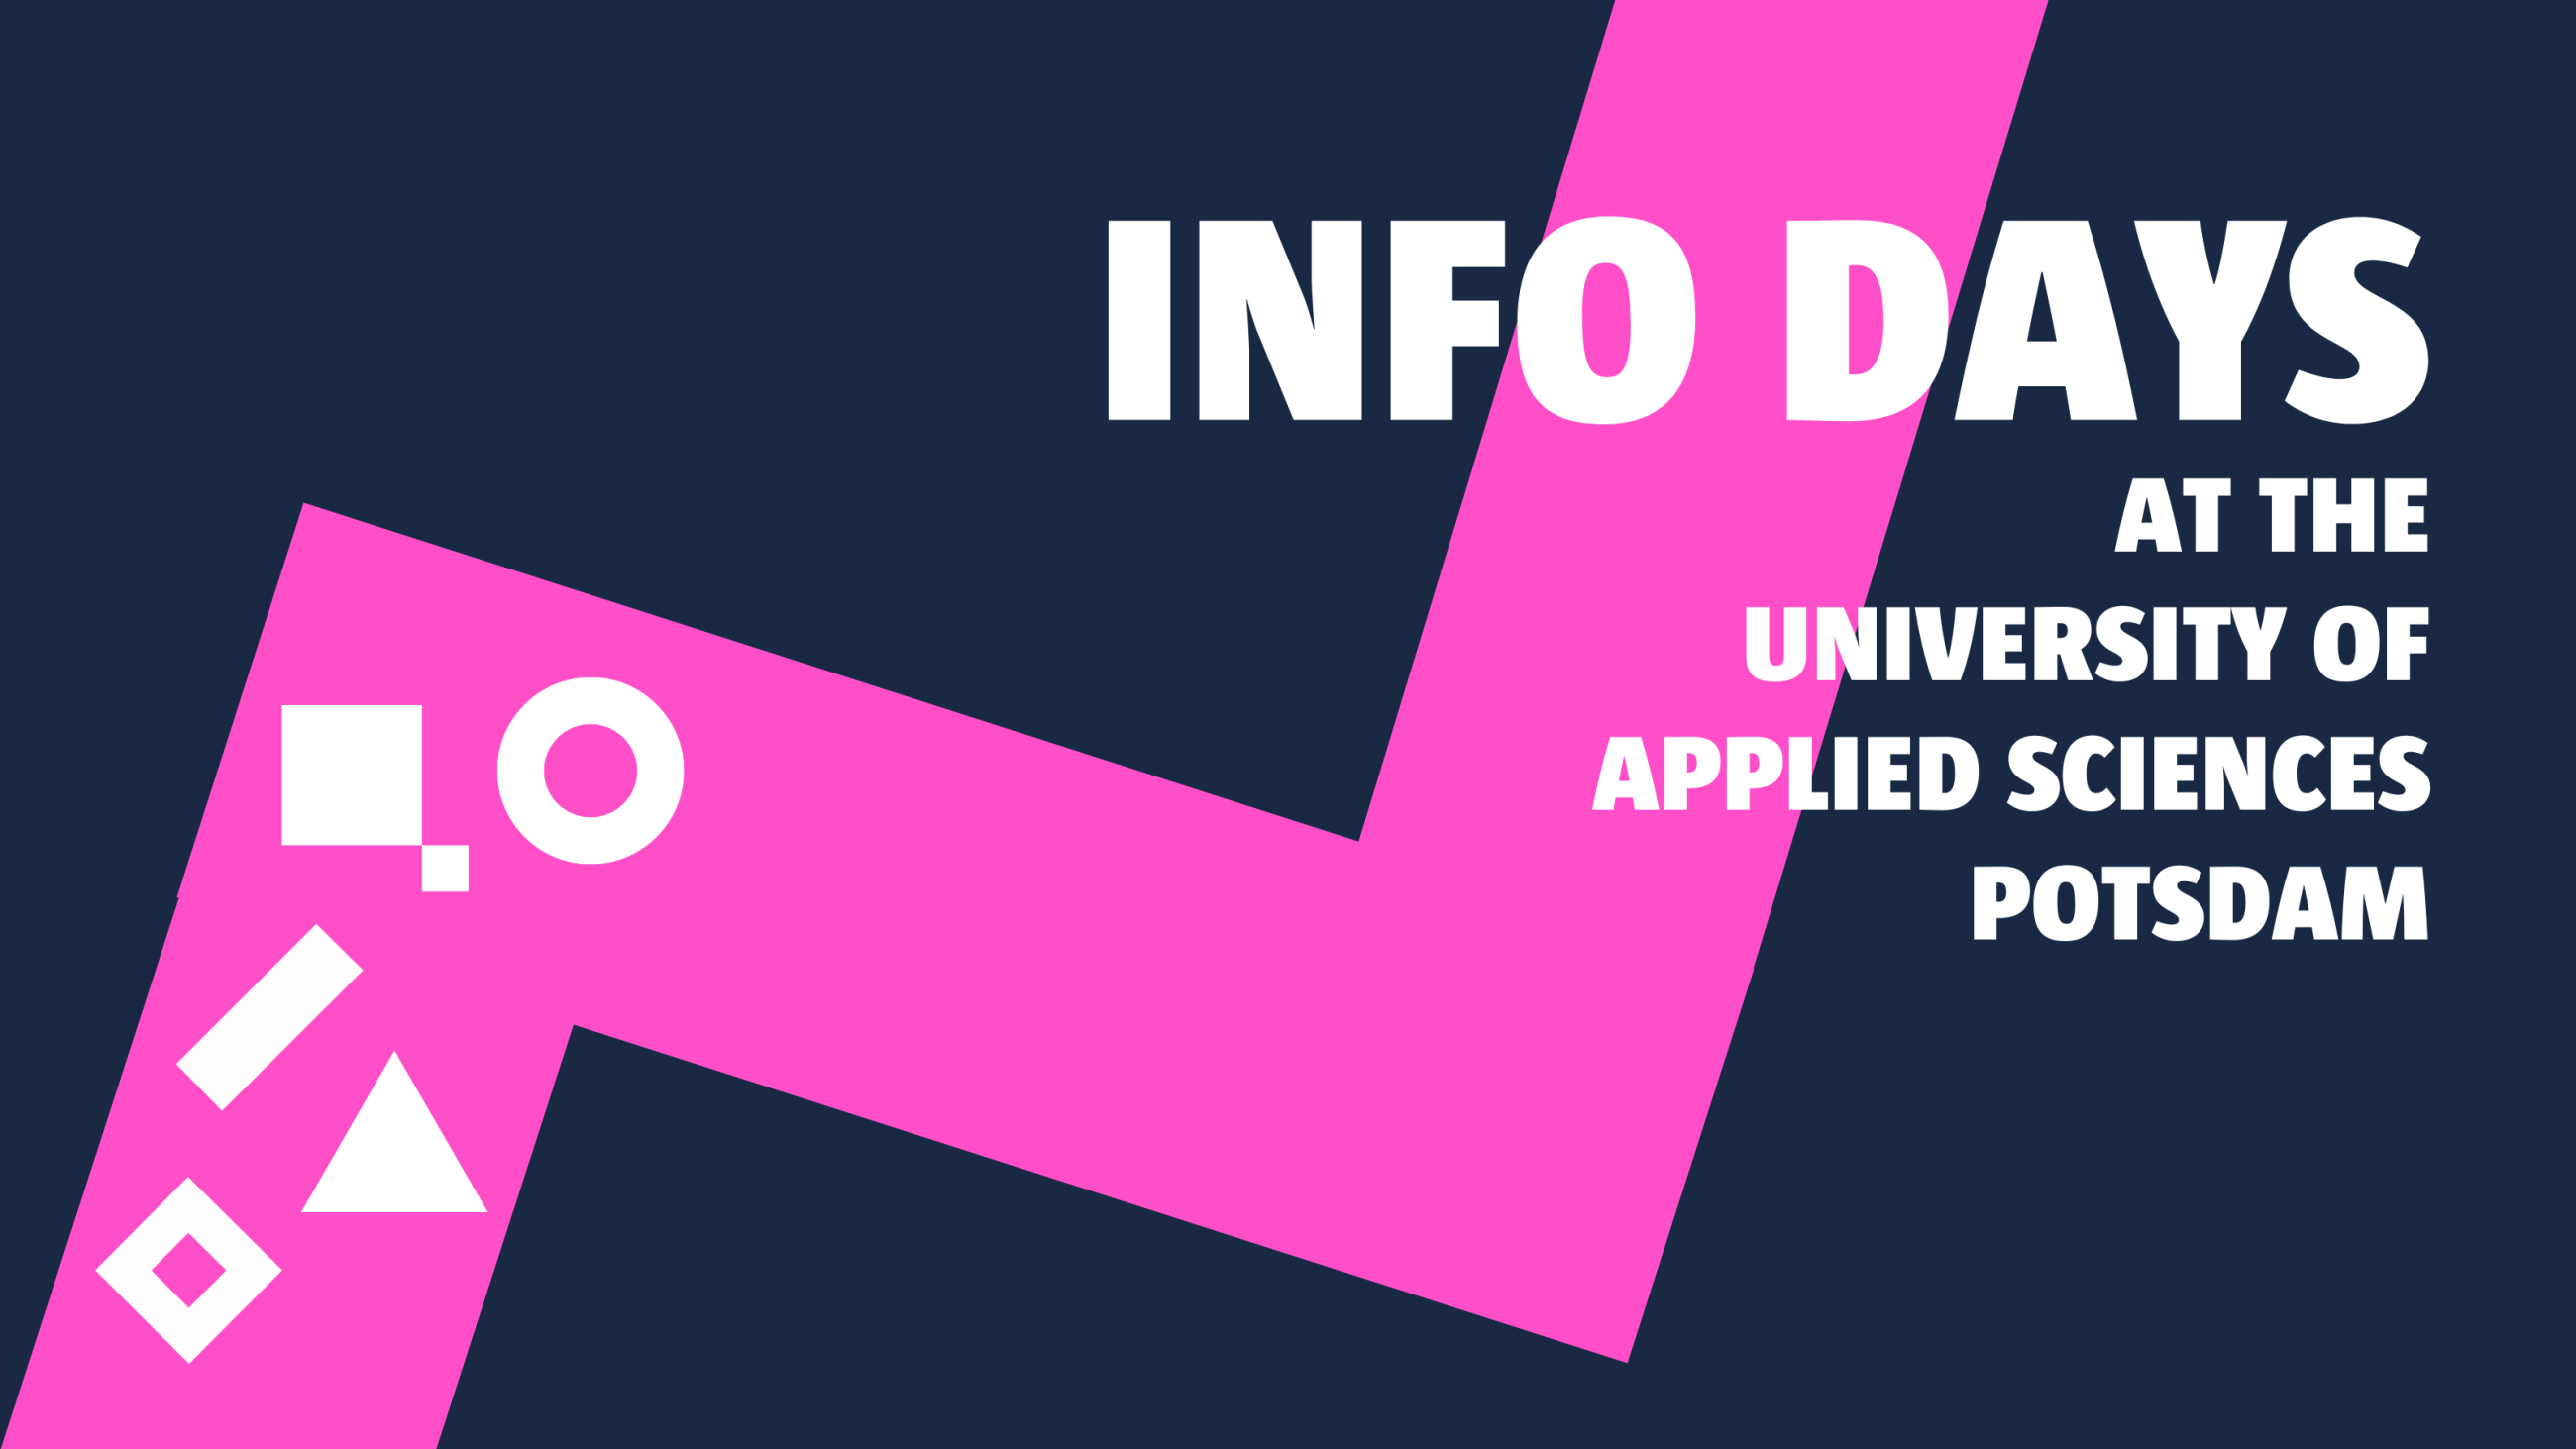 Key visual info days with department symbols and text "Info days at the University of Applied Sciences Potsdam" in front of abstract path